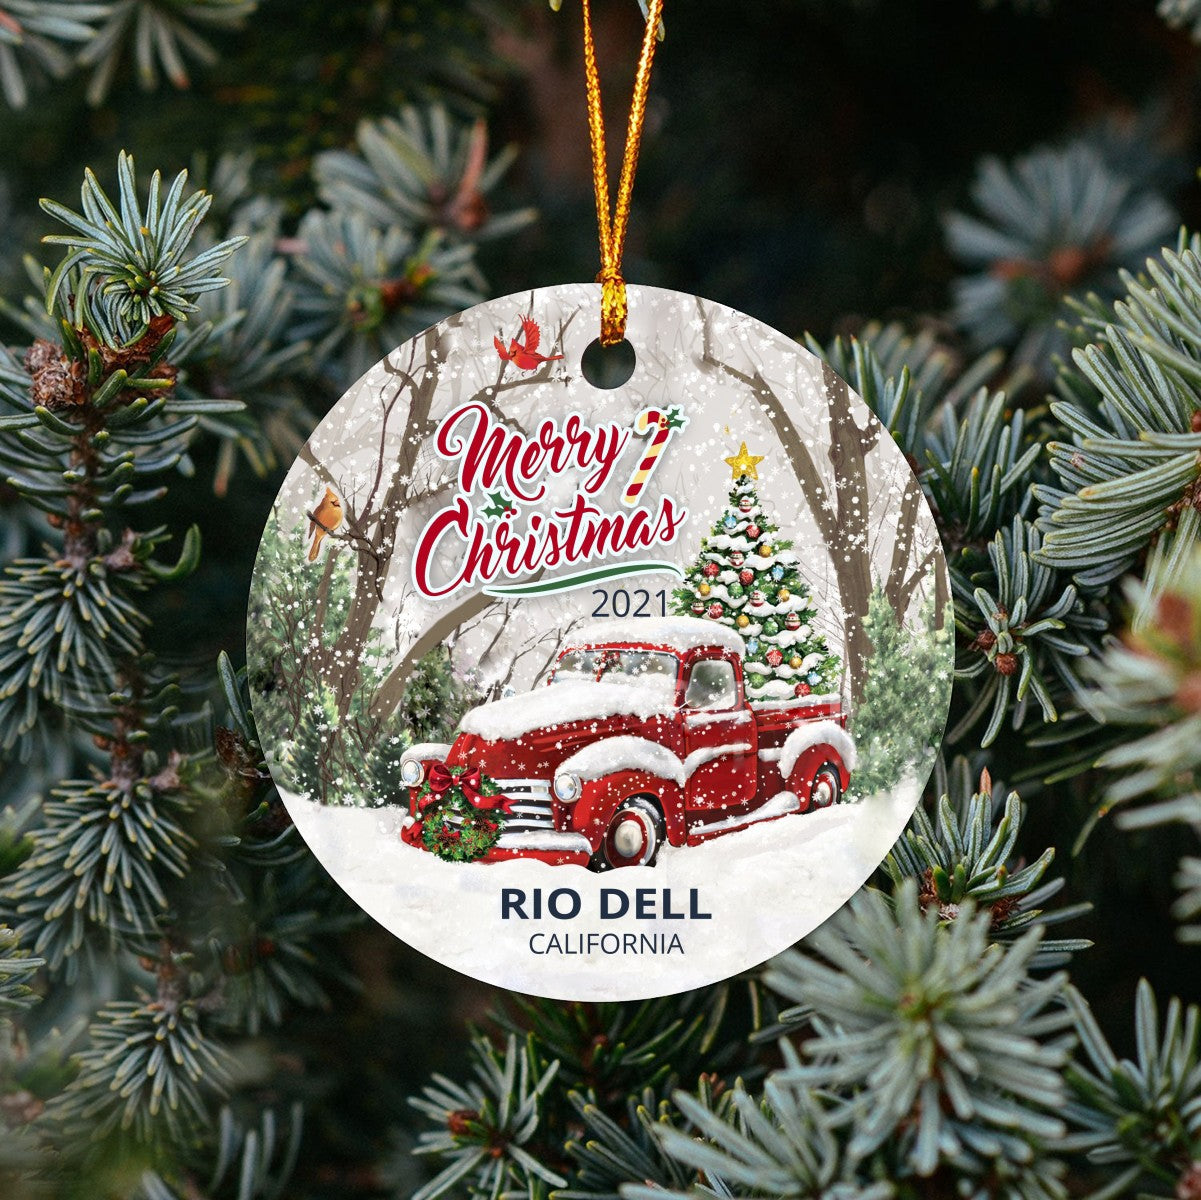 Christmas Tree Ornaments Rio Dell - Ornament With Name City, State Rio Dell California CA Ornament - Red Truck Xmas Ornaments 3'' Plastic Gift For Family, Friend And Housewarming